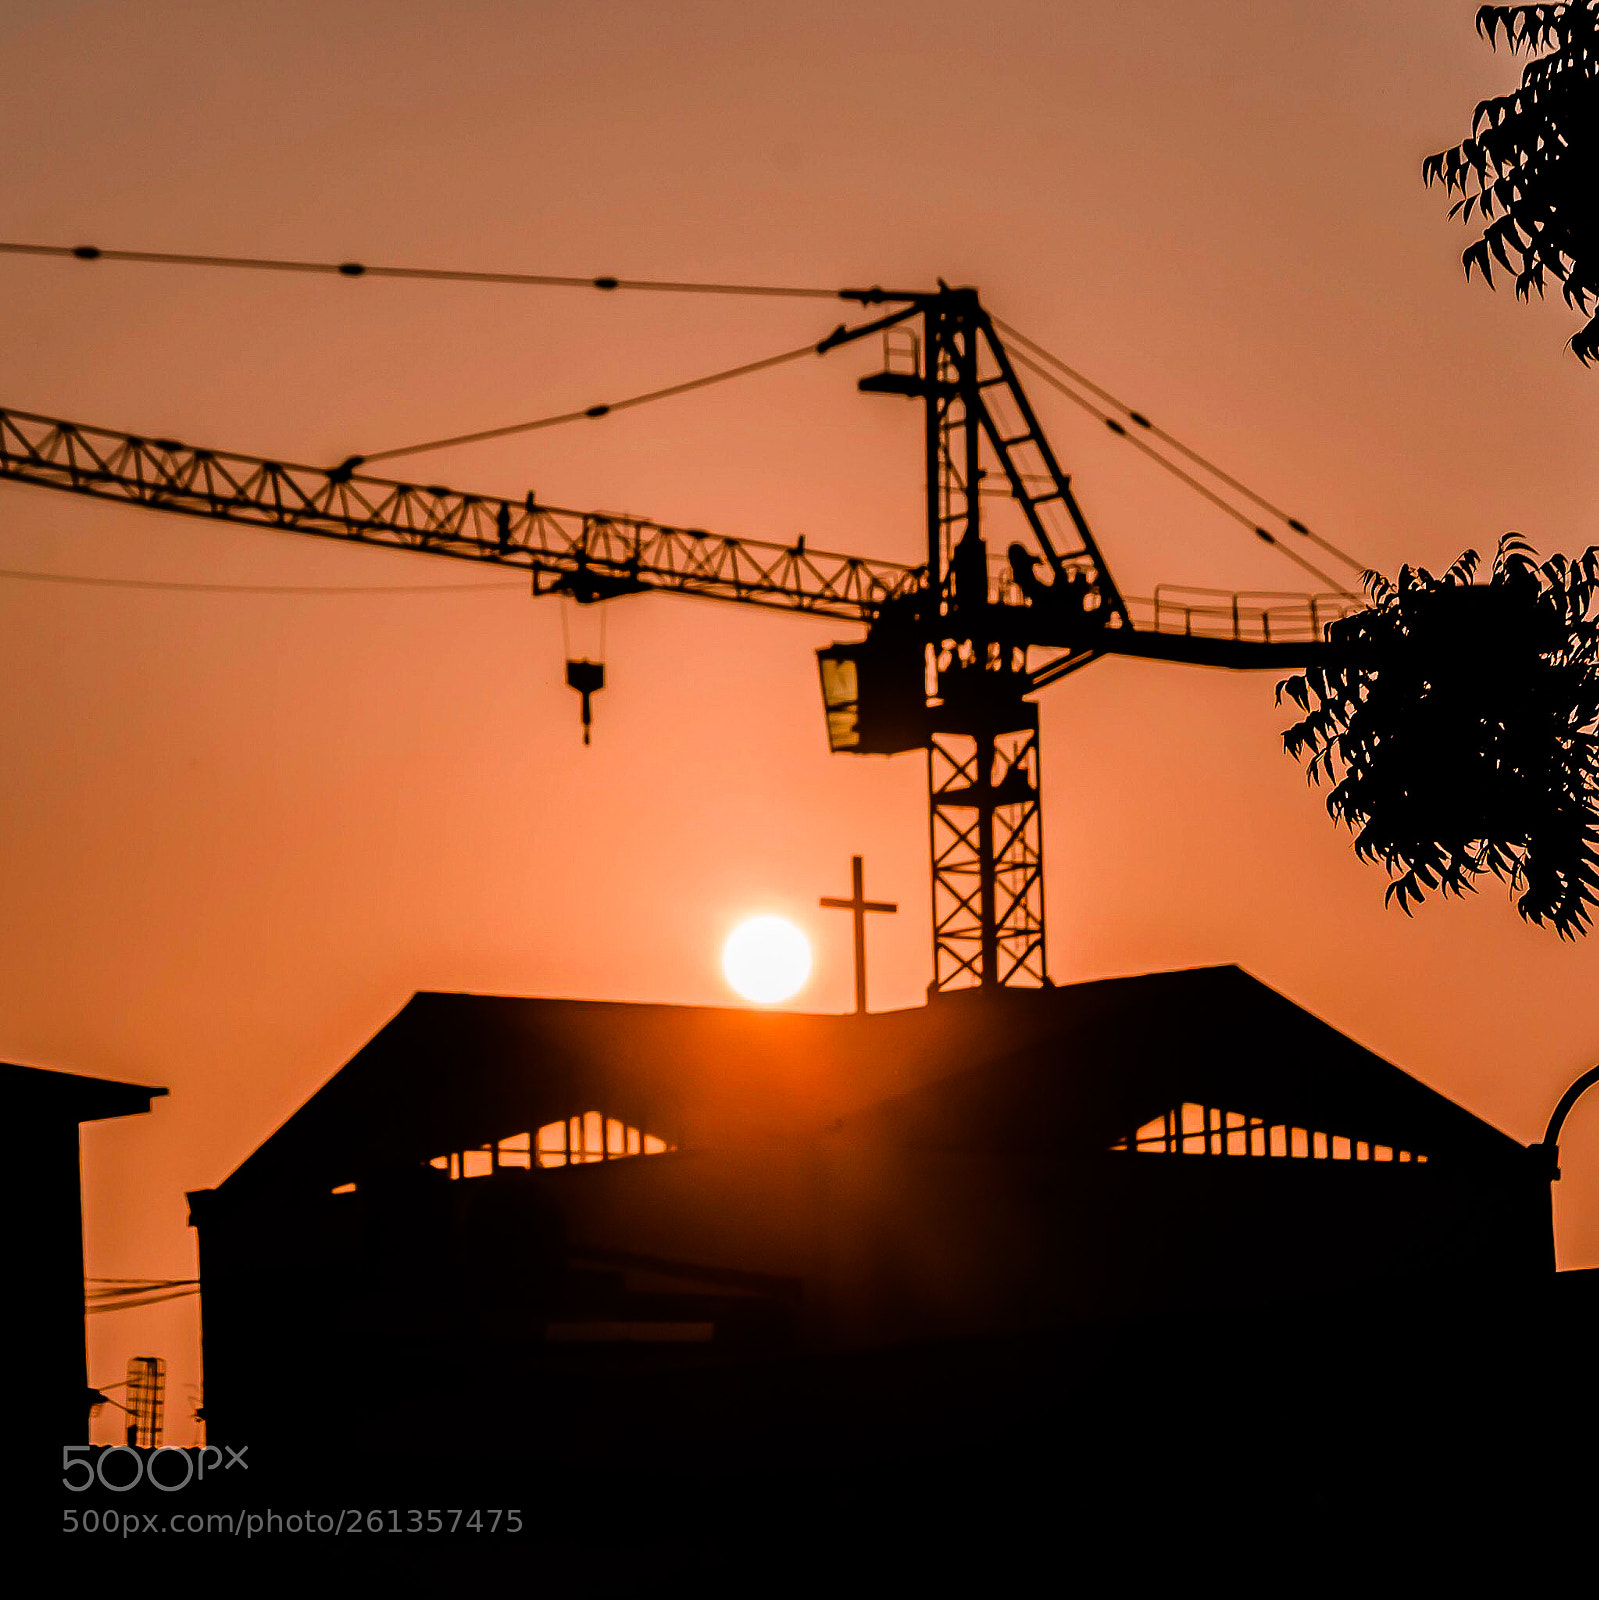 Nikon D7000 sample photo. Silhouettes, structures and sunsets photography